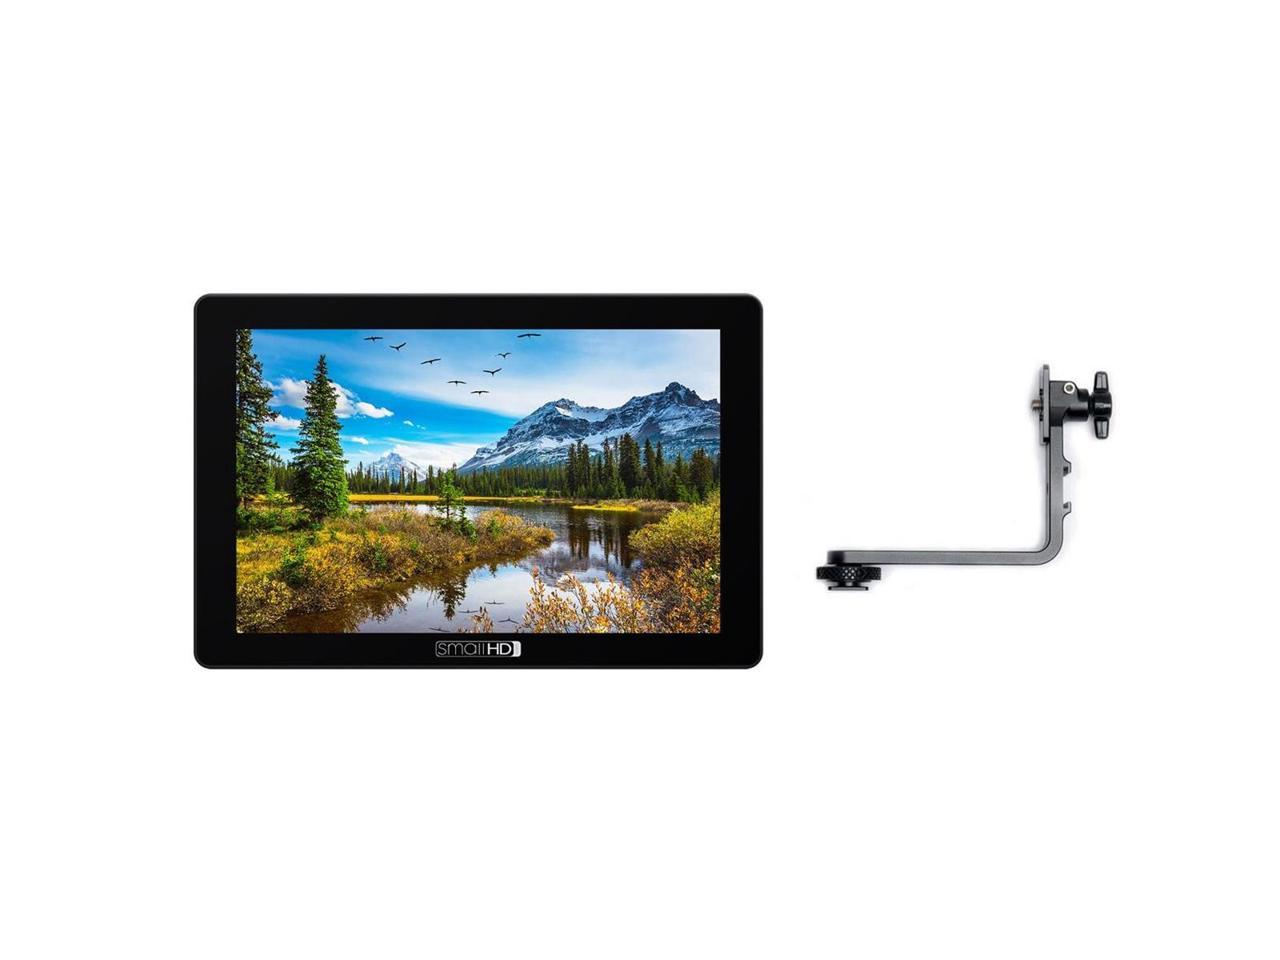 1920x1200 Tilt Arm Accessory Pack for Focus 7 Monitor SmallHD 702 Touch 7 Full HD On-Camera LCD Touchscreen Monitor 1500 nits Brightness 